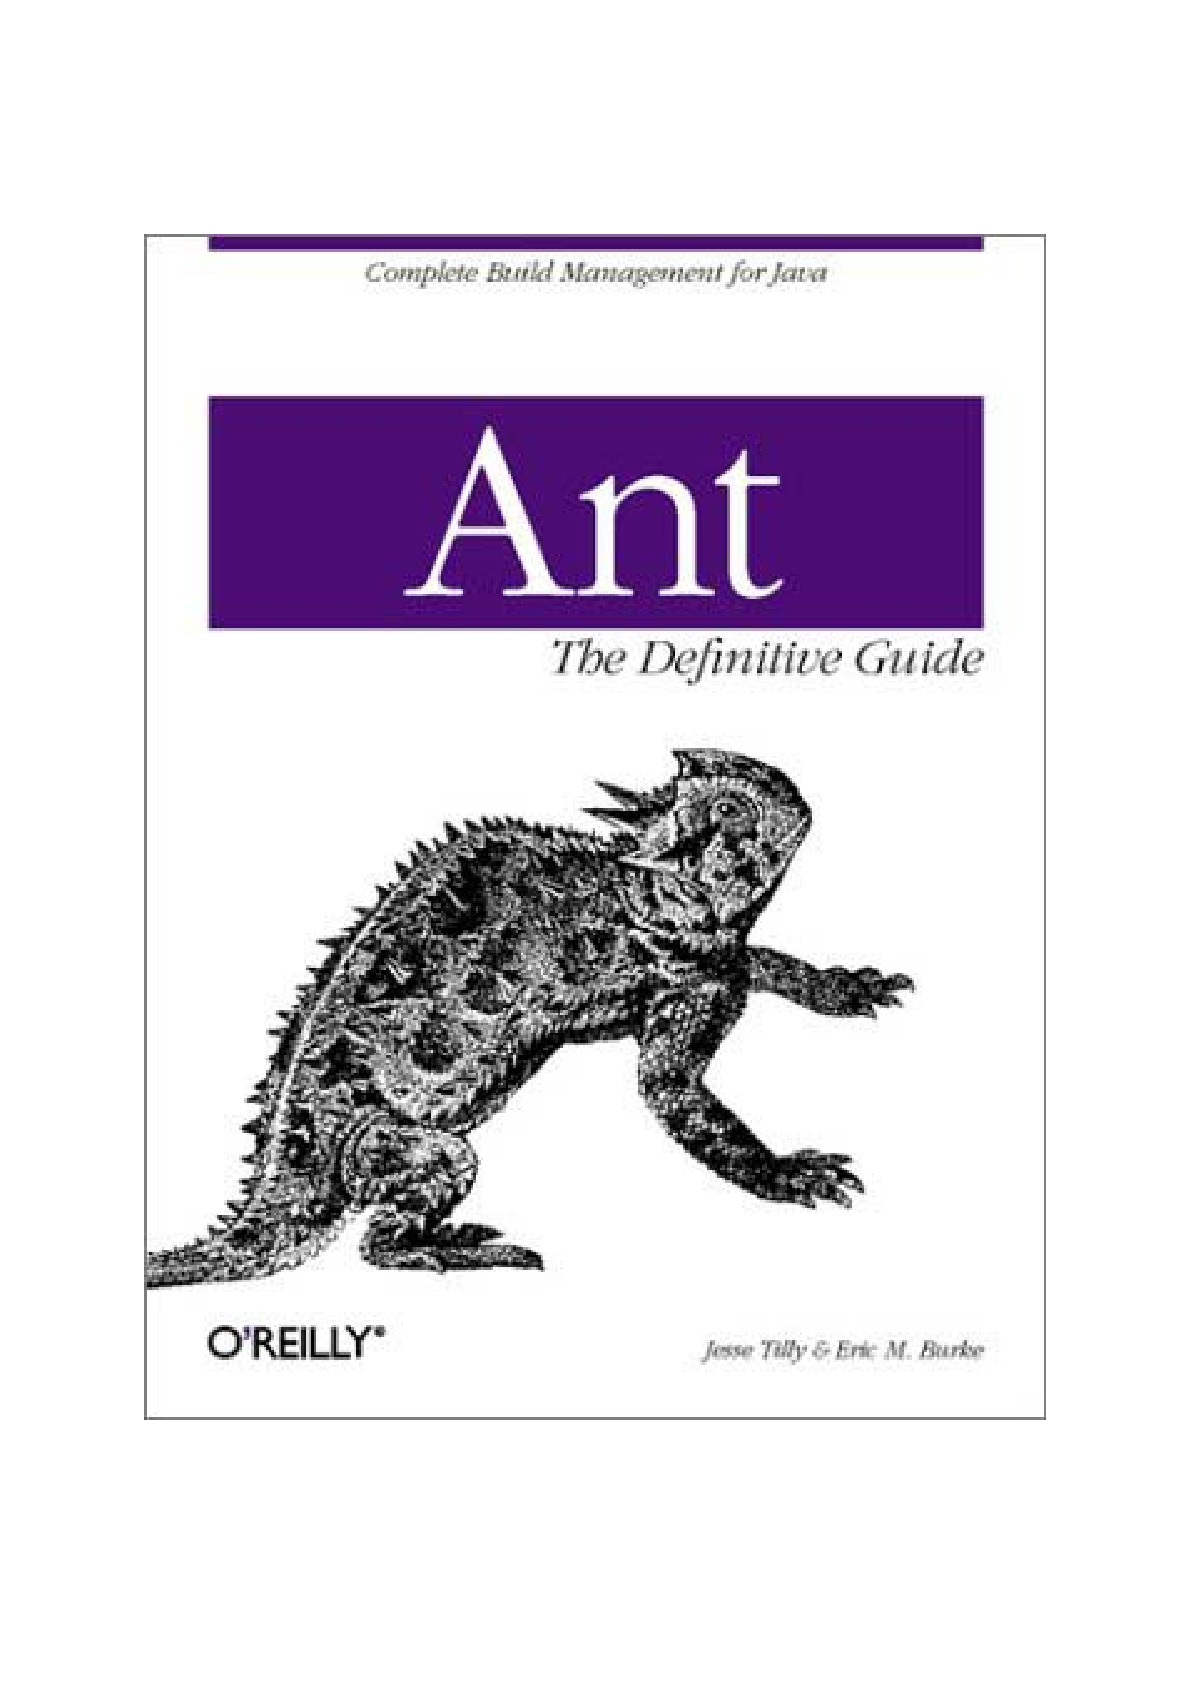 [JAVA][Ant The Definitive Guide]